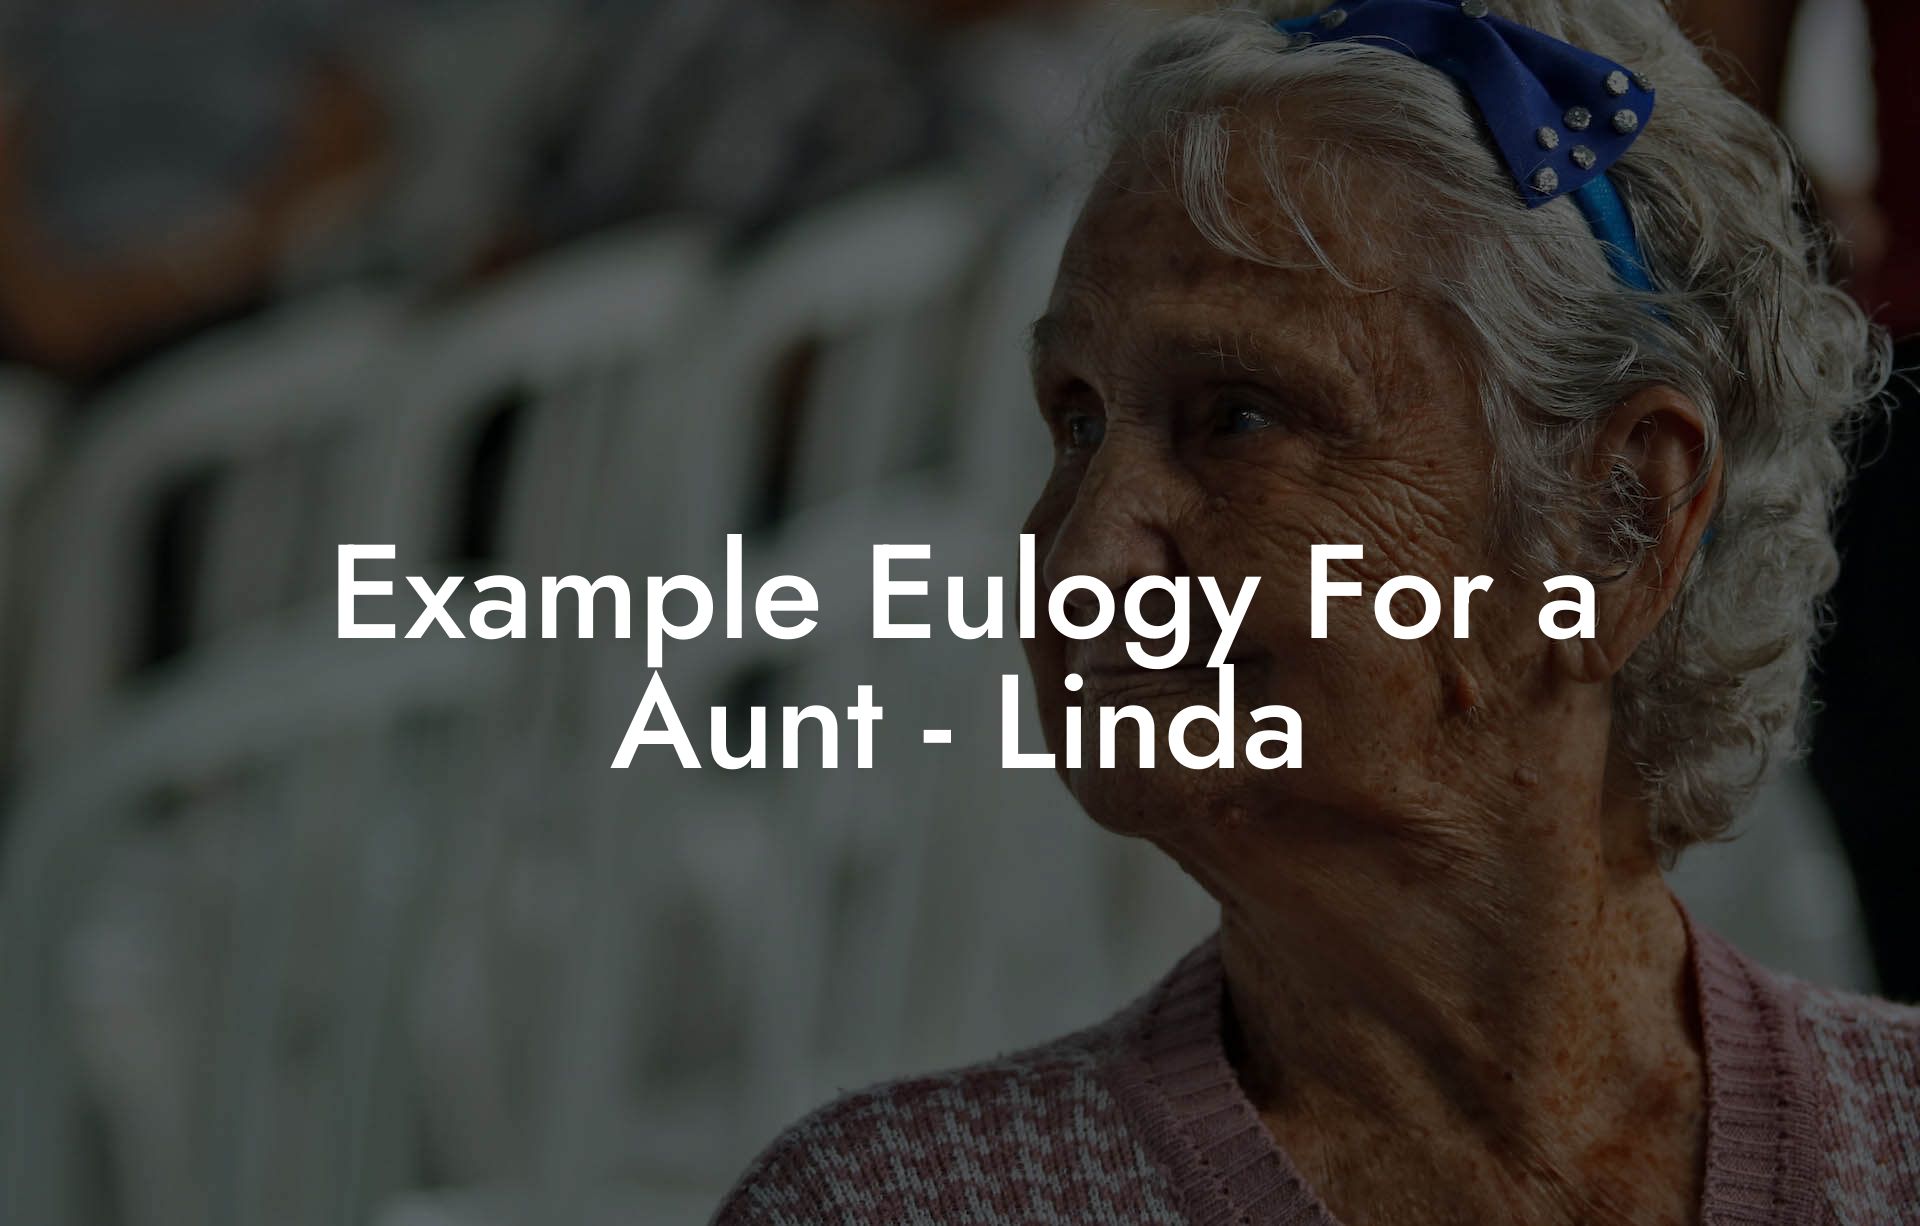 Example Eulogy For a Aunt - Linda